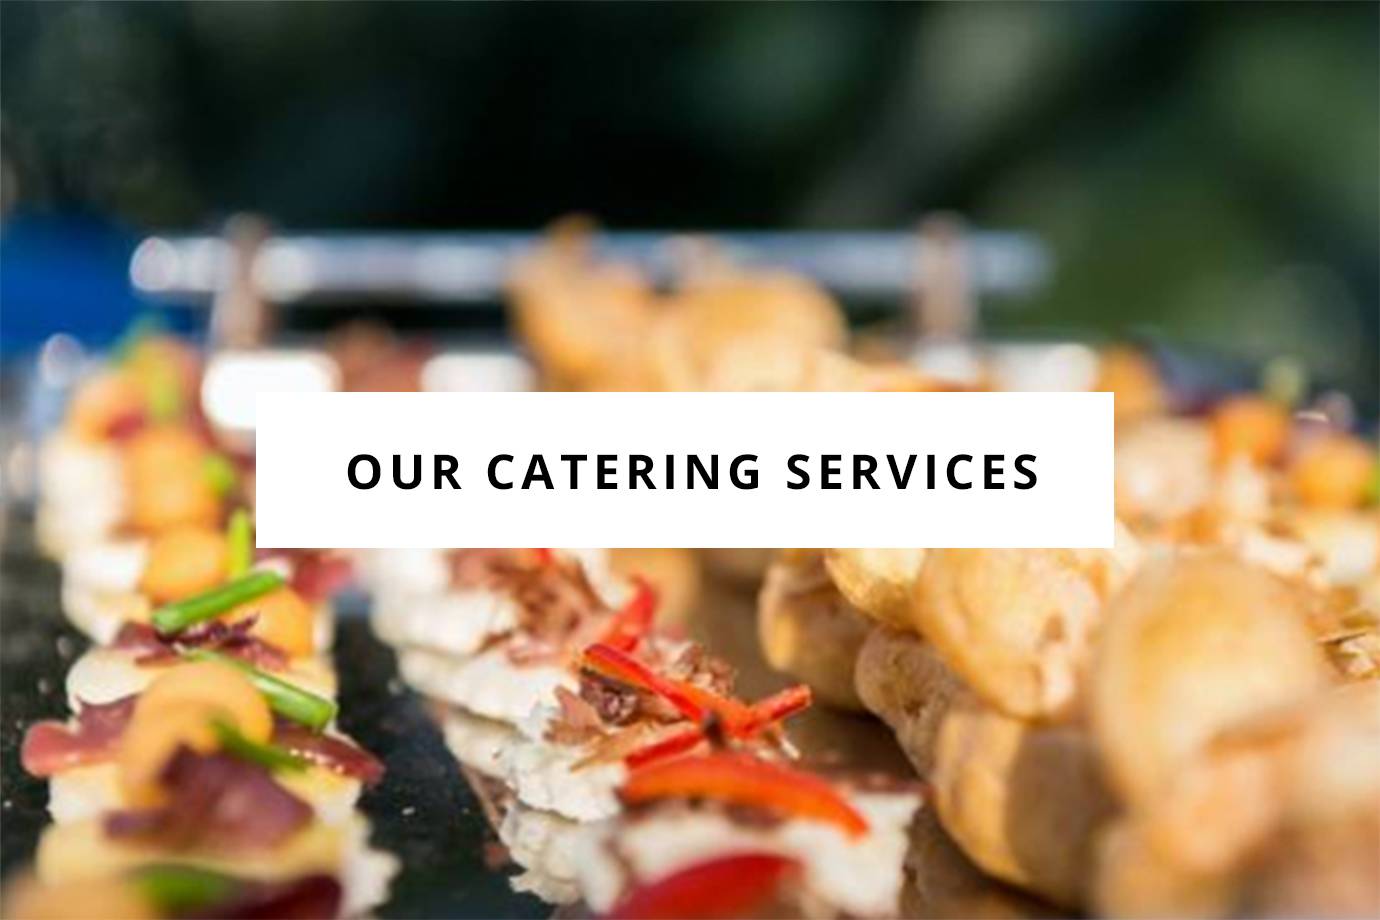 Offer Wählt unsere Catering-Service.